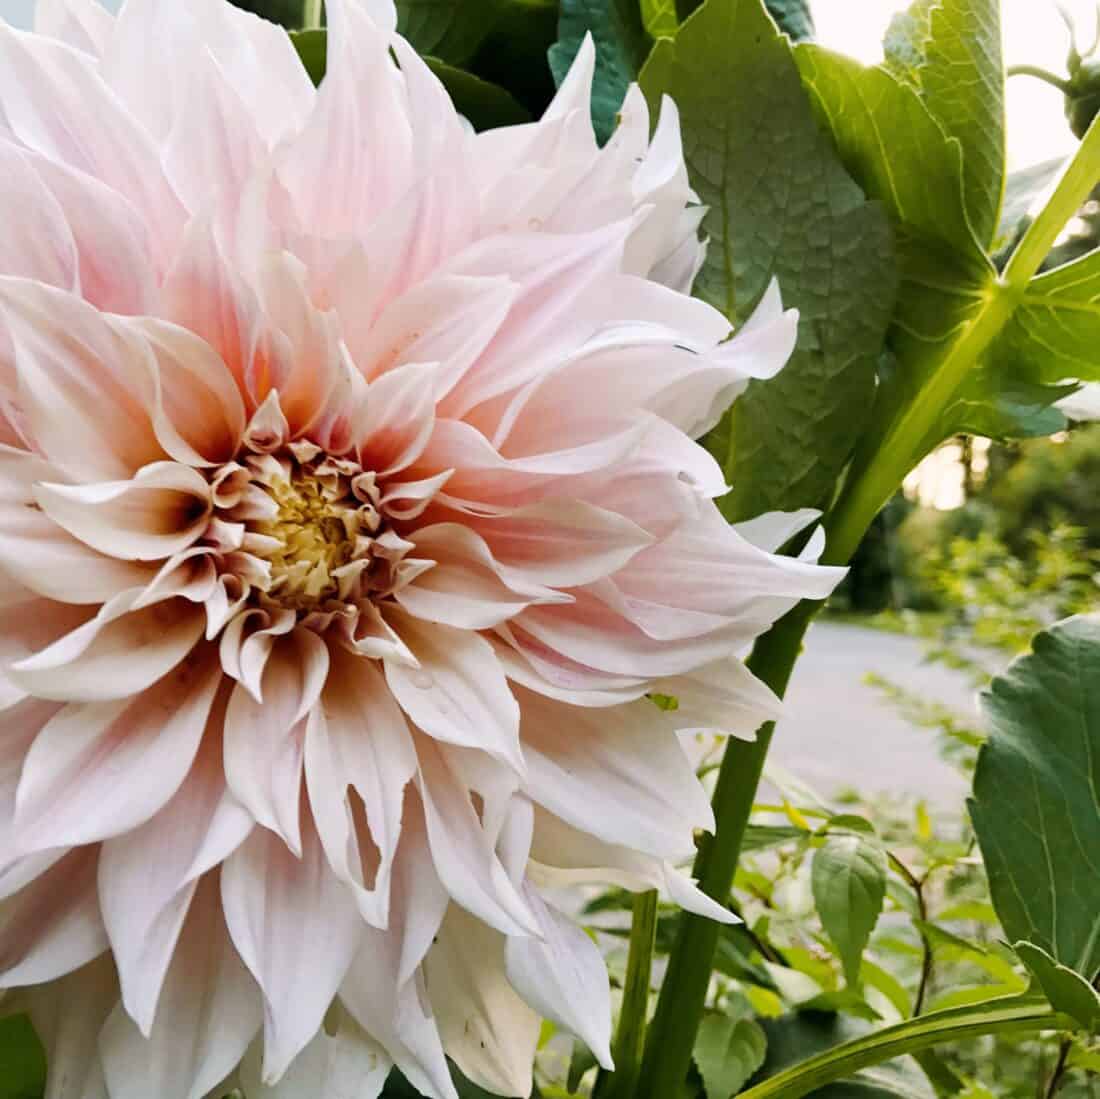 cafe au lait dinner plate dahlia in a garden by rochelle greayer